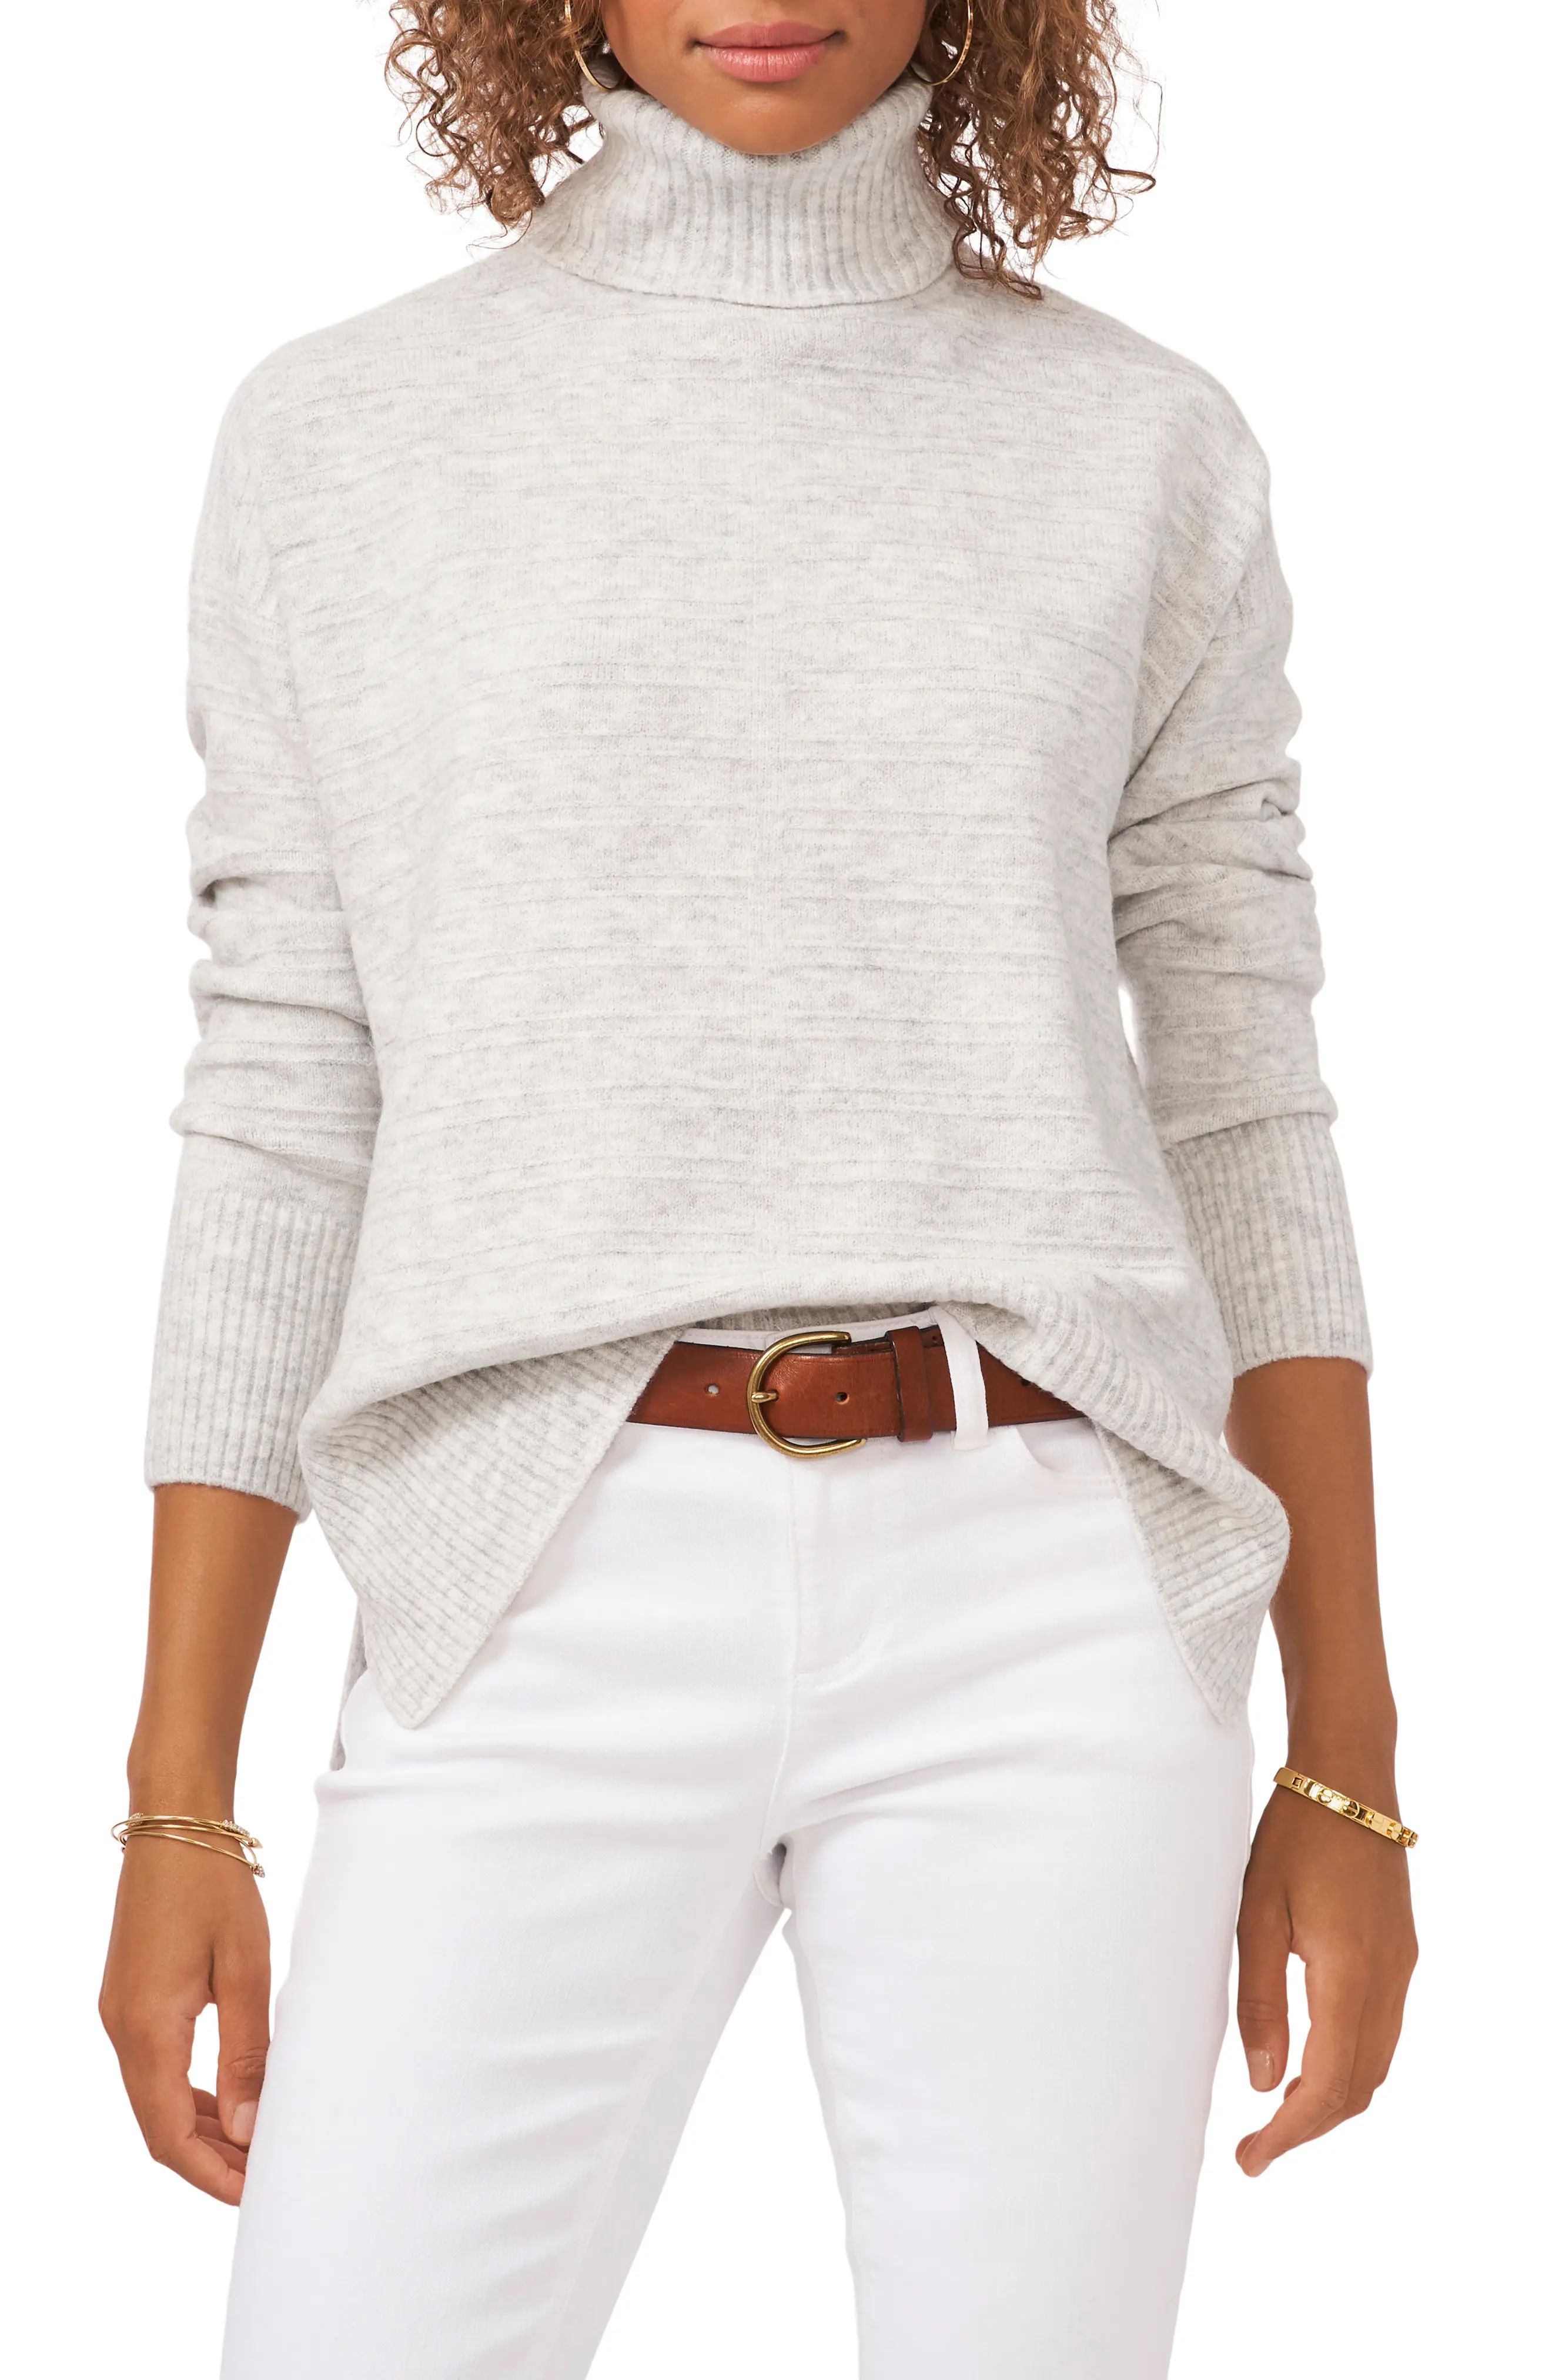 Vince Camuto Textured Turtleneck Sweater in Silver Heather at Nordstrom, Size X-Small | Nordstrom